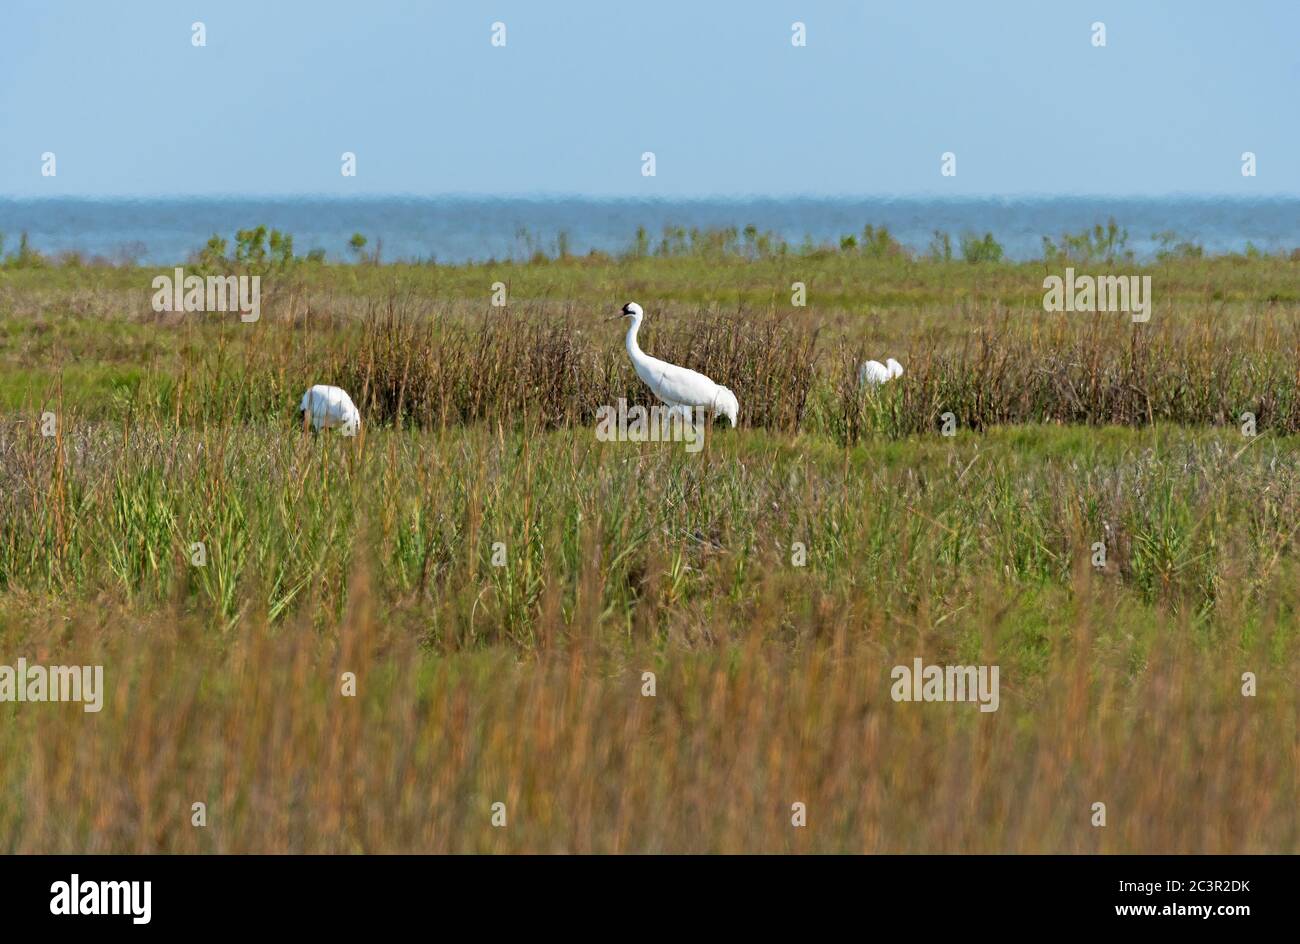 Whooping Crane in the Wetland Along the Gulf Coast in the Aranasas National Wildlife Refuge in Texas Stock Photo